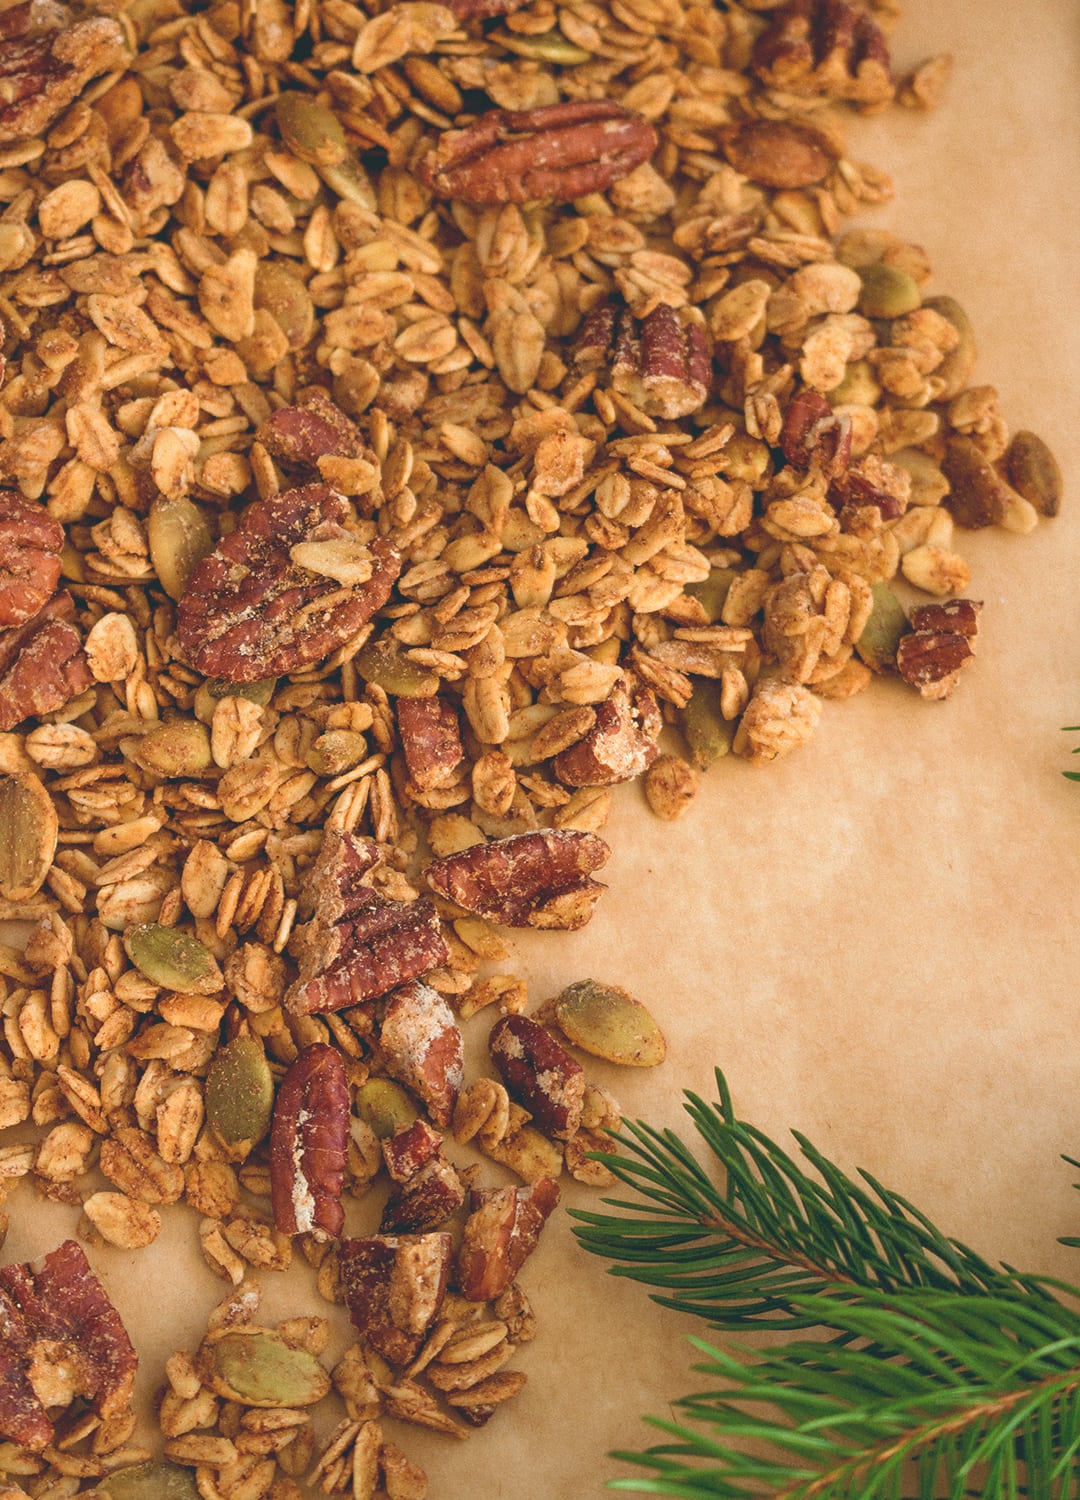 Gingerbread Granola - delicious and healthy alternative to store bought granola that's usually full of sugar. I love this recipe! Gingerbread flavored granola is heavenly, it's the ultimate Christmas snack. | thehealthfulideas.com